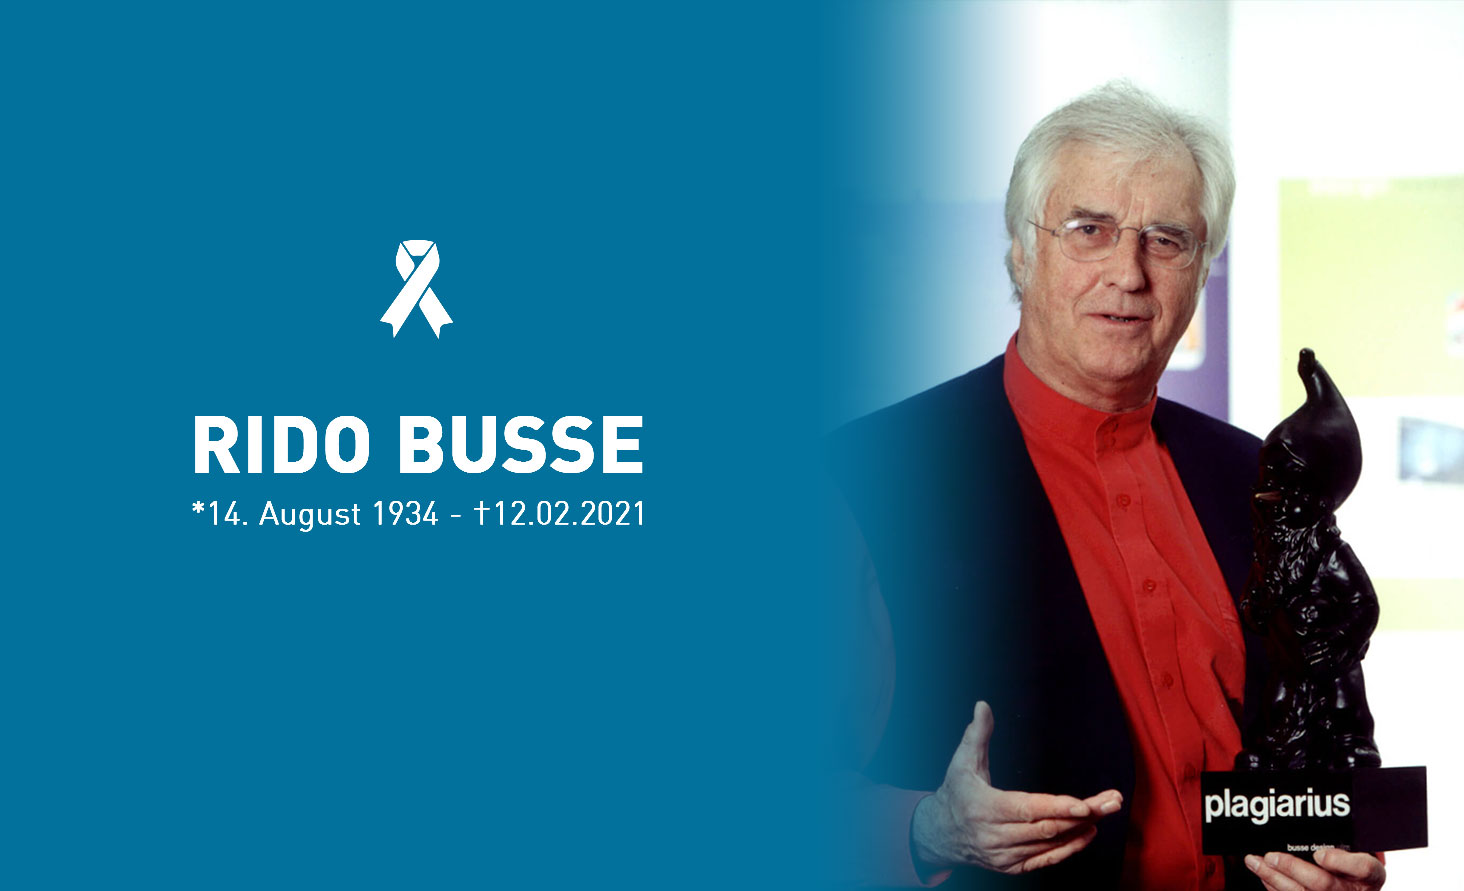 Memorial tribute to Rido Busse featuring his portrait with a white ribbon icon, displaying his lifespan from August 14, 1934, to February 12, 2021. Rido Busse holds the Plagiarius award.